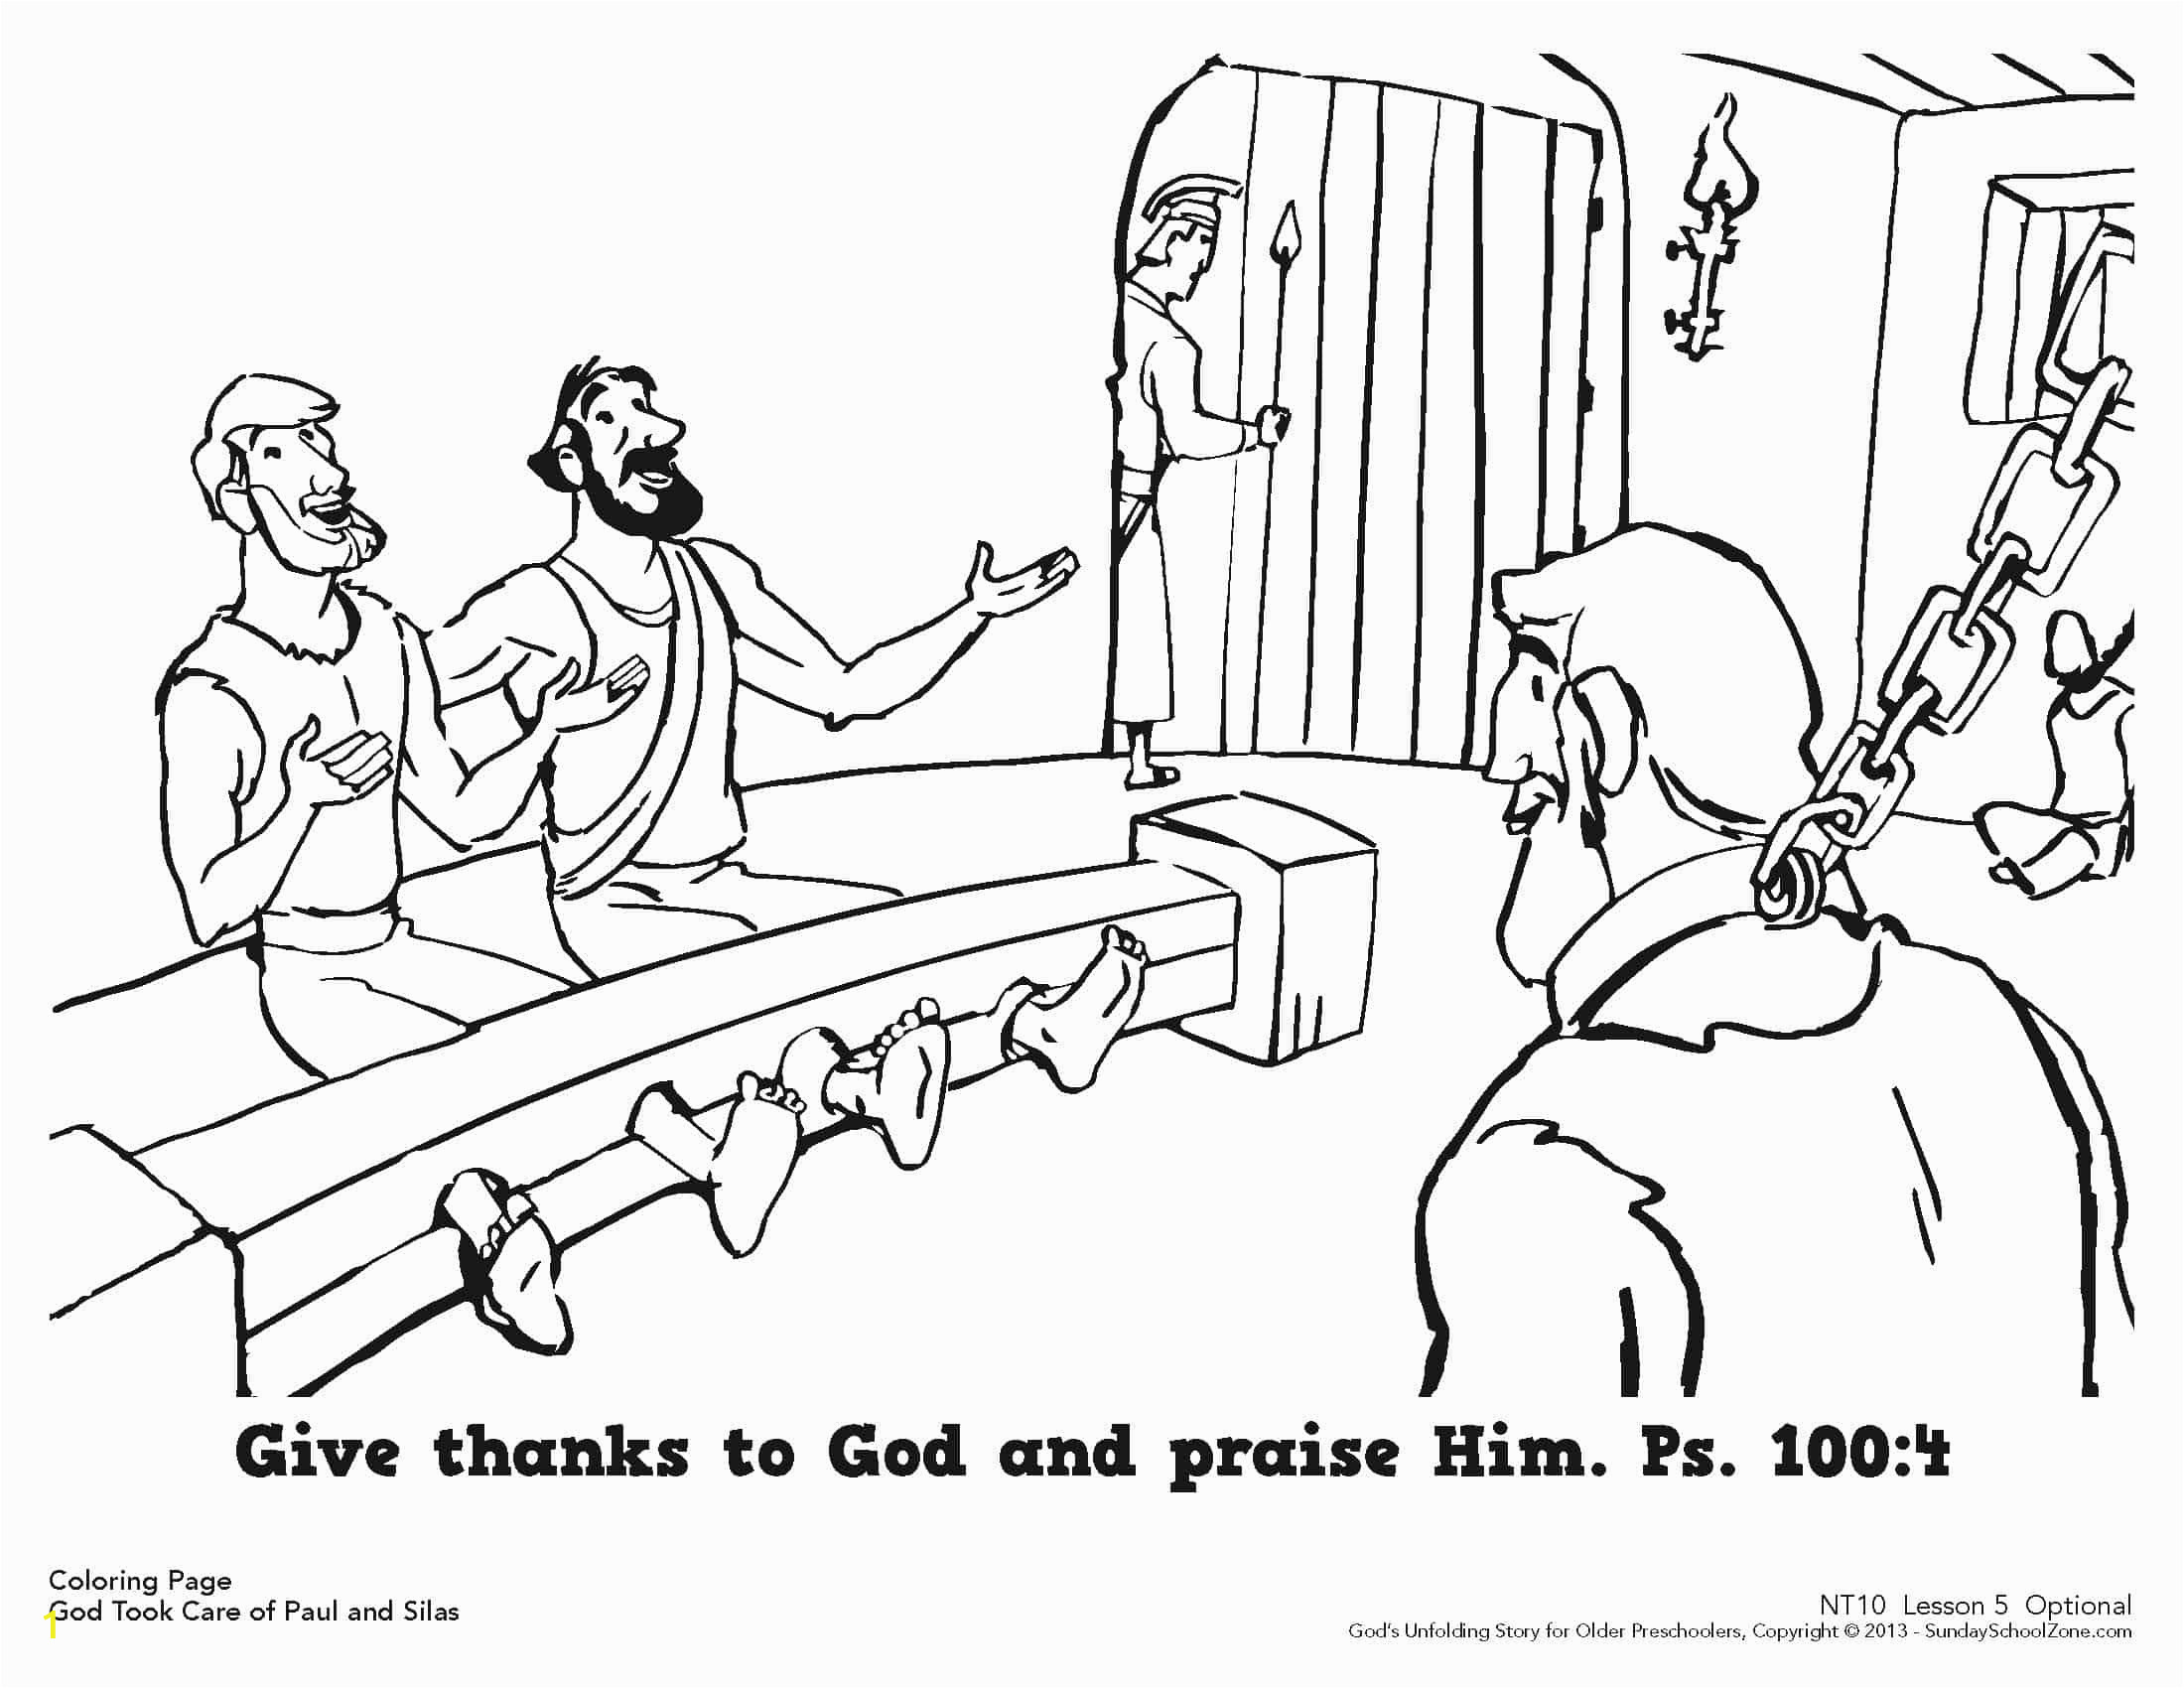 Bible Coloring Pages Paul and Silas Paul and Silas Were Rescued From Jail Coloring Page for Kids